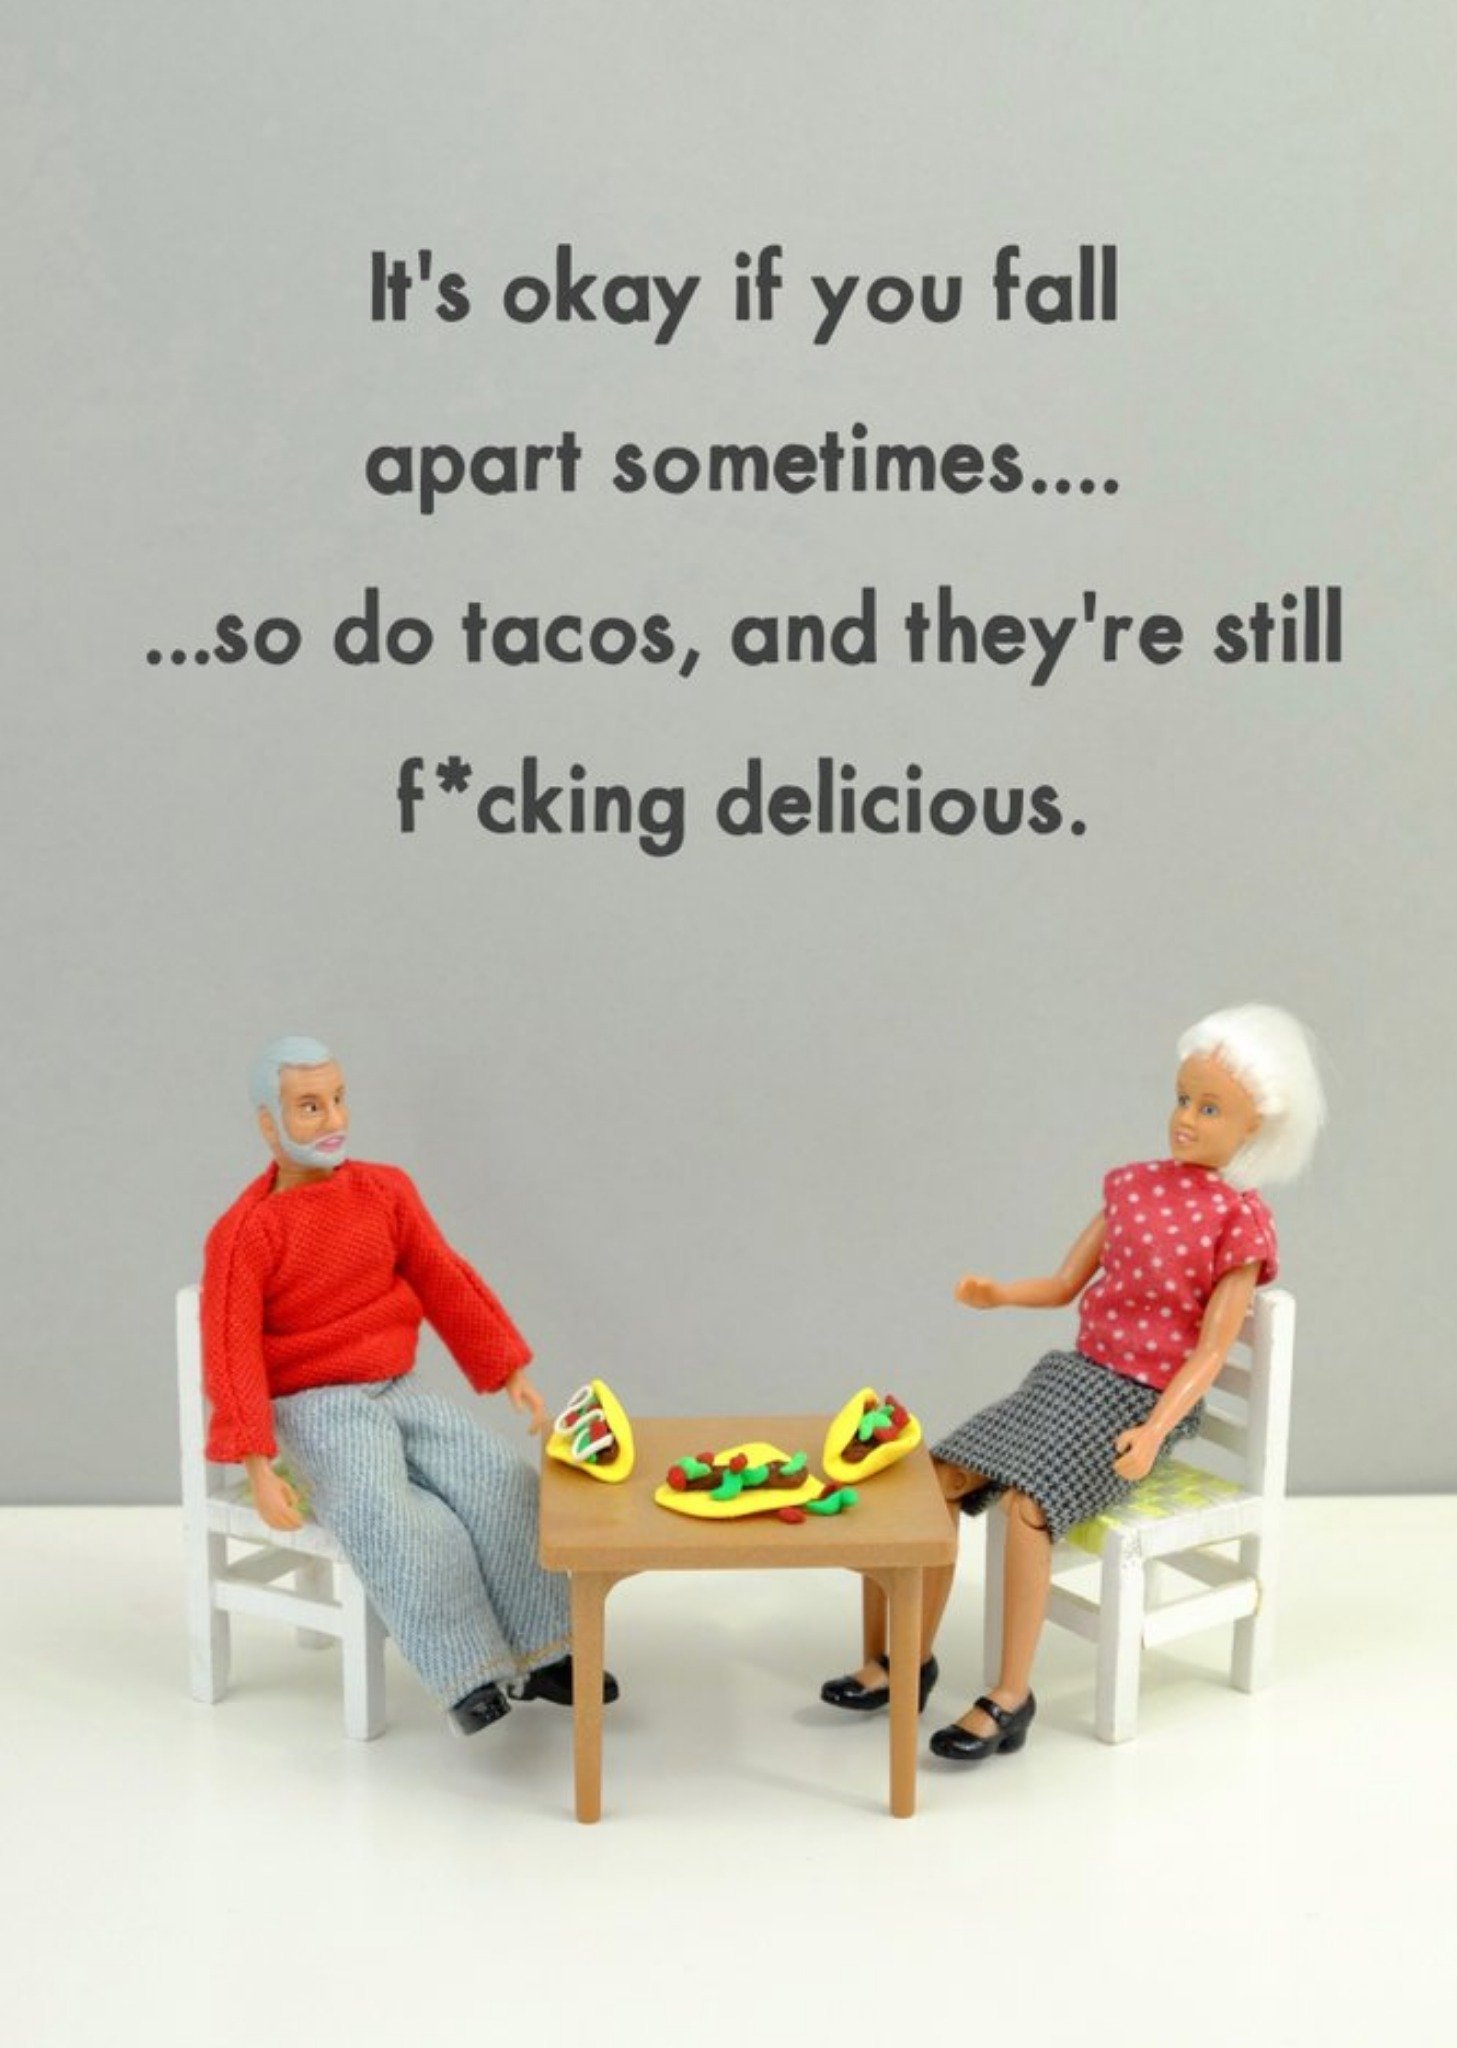 Bold And Bright Funny Photographic Image Of Two Dolls Eating Tacos It's Ok If You Fall Apart Sometim